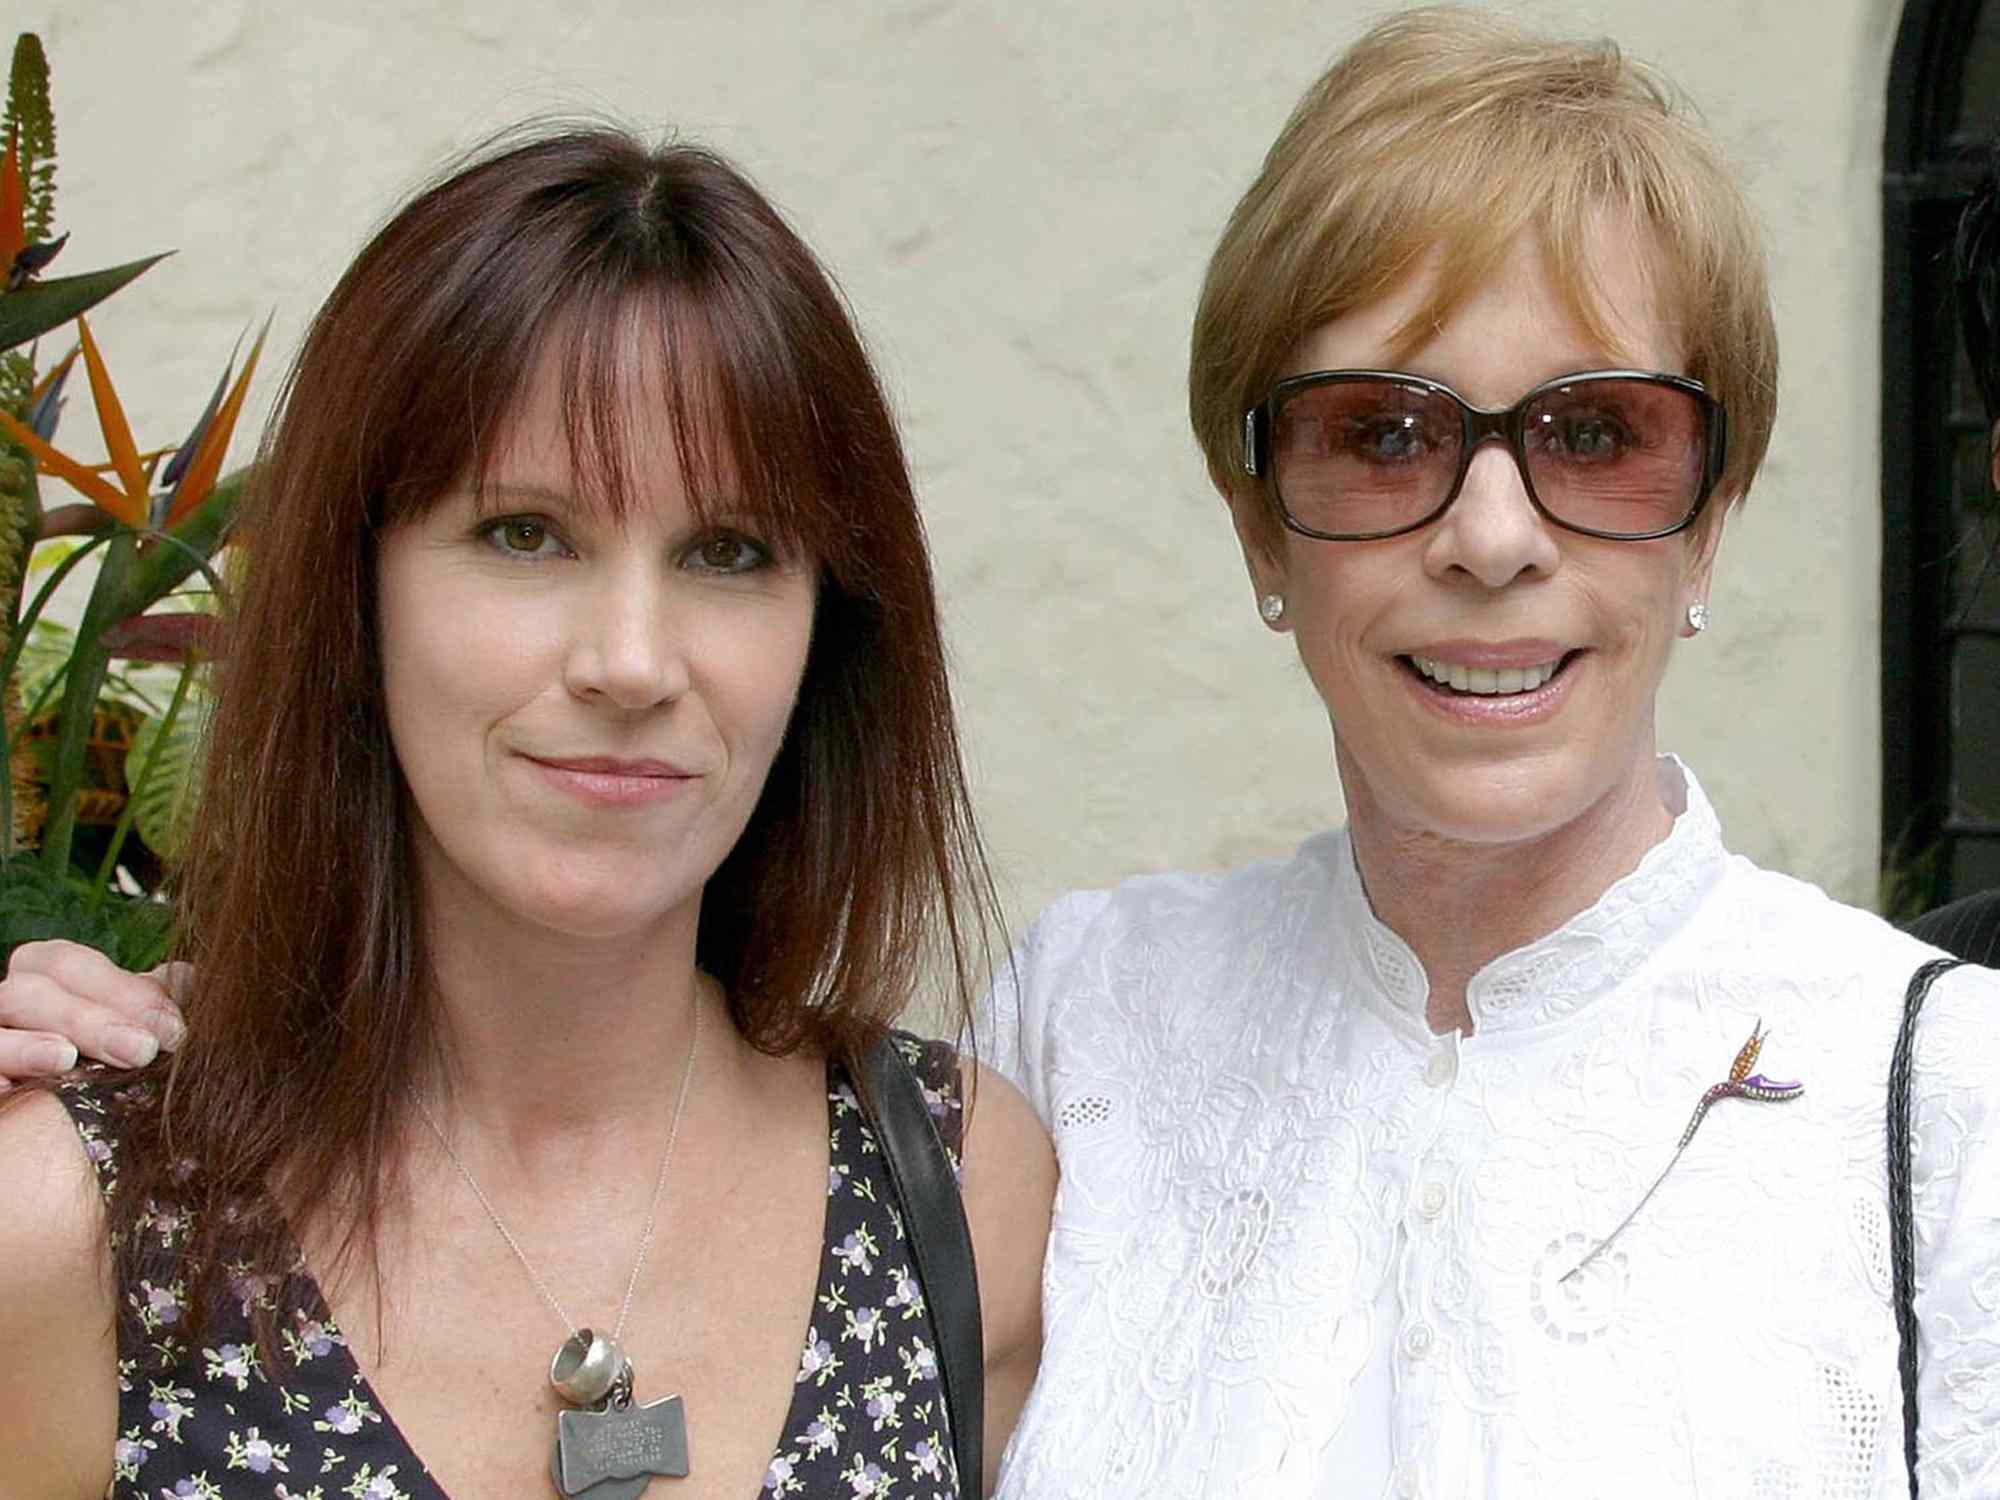 Jody Hamilton, her mother comedienne Carol Burnett, and Lonny Johnson attend the dedication ceremony for the Carrie Hamilton Theatre, formerly the Balcony Theatre, at the Pasadena Playhouse July 17, 2006 in Pasadena, California